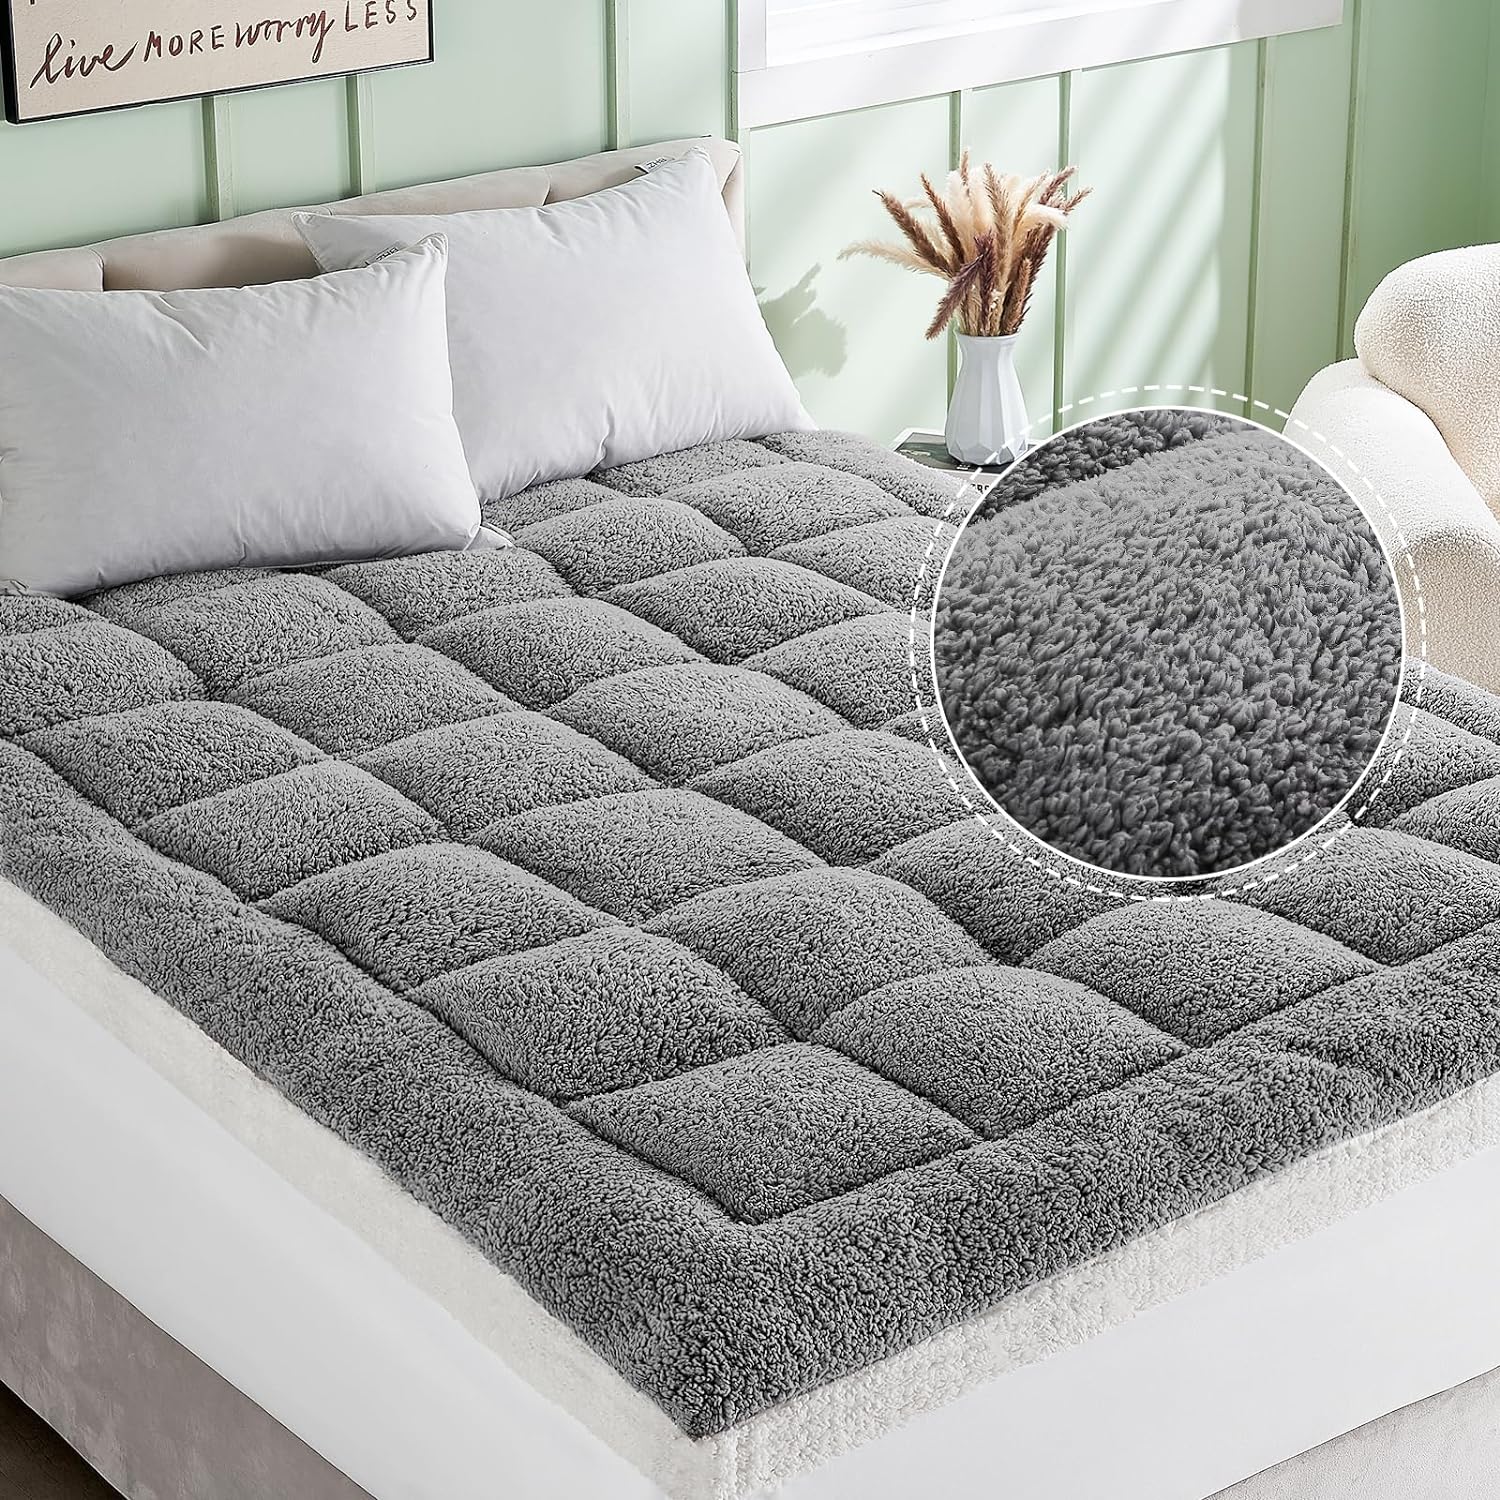 I had a similar one for my twin bed but I upgraded to a full and needed one to fit. This one is beyond soft and goes all the way to the edges of the mattress. It has a backing and some foam in between, the sides are generous and fit deep mattresses. With the flannel sheets on for winter it feels plushy and super soft, no chilly cold mattress to greet you at bedtime. This one is even better than the original !